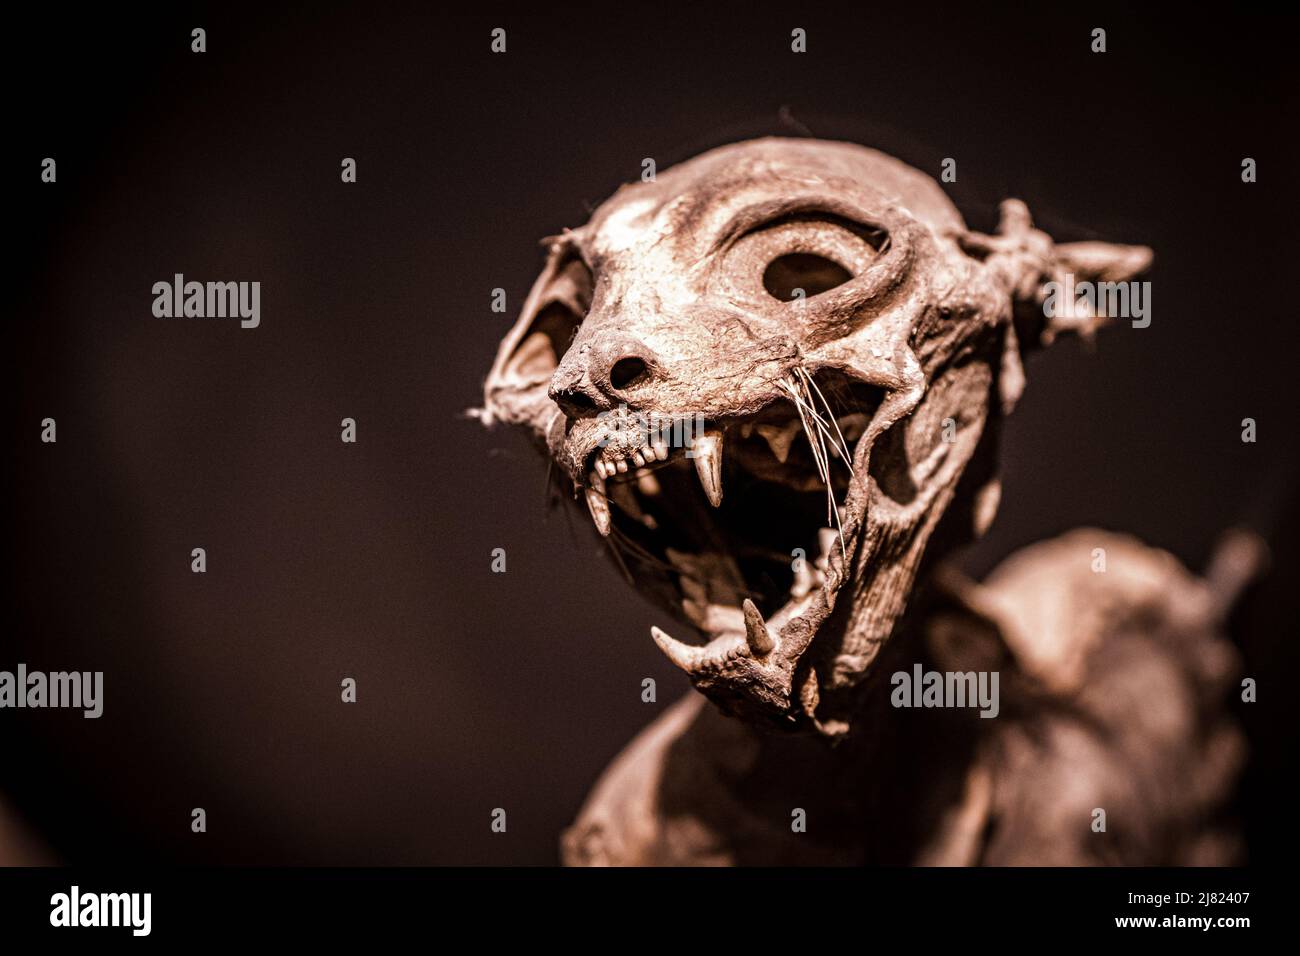 Scary close-up view of a mummified cat isolated on black background Stock Photo